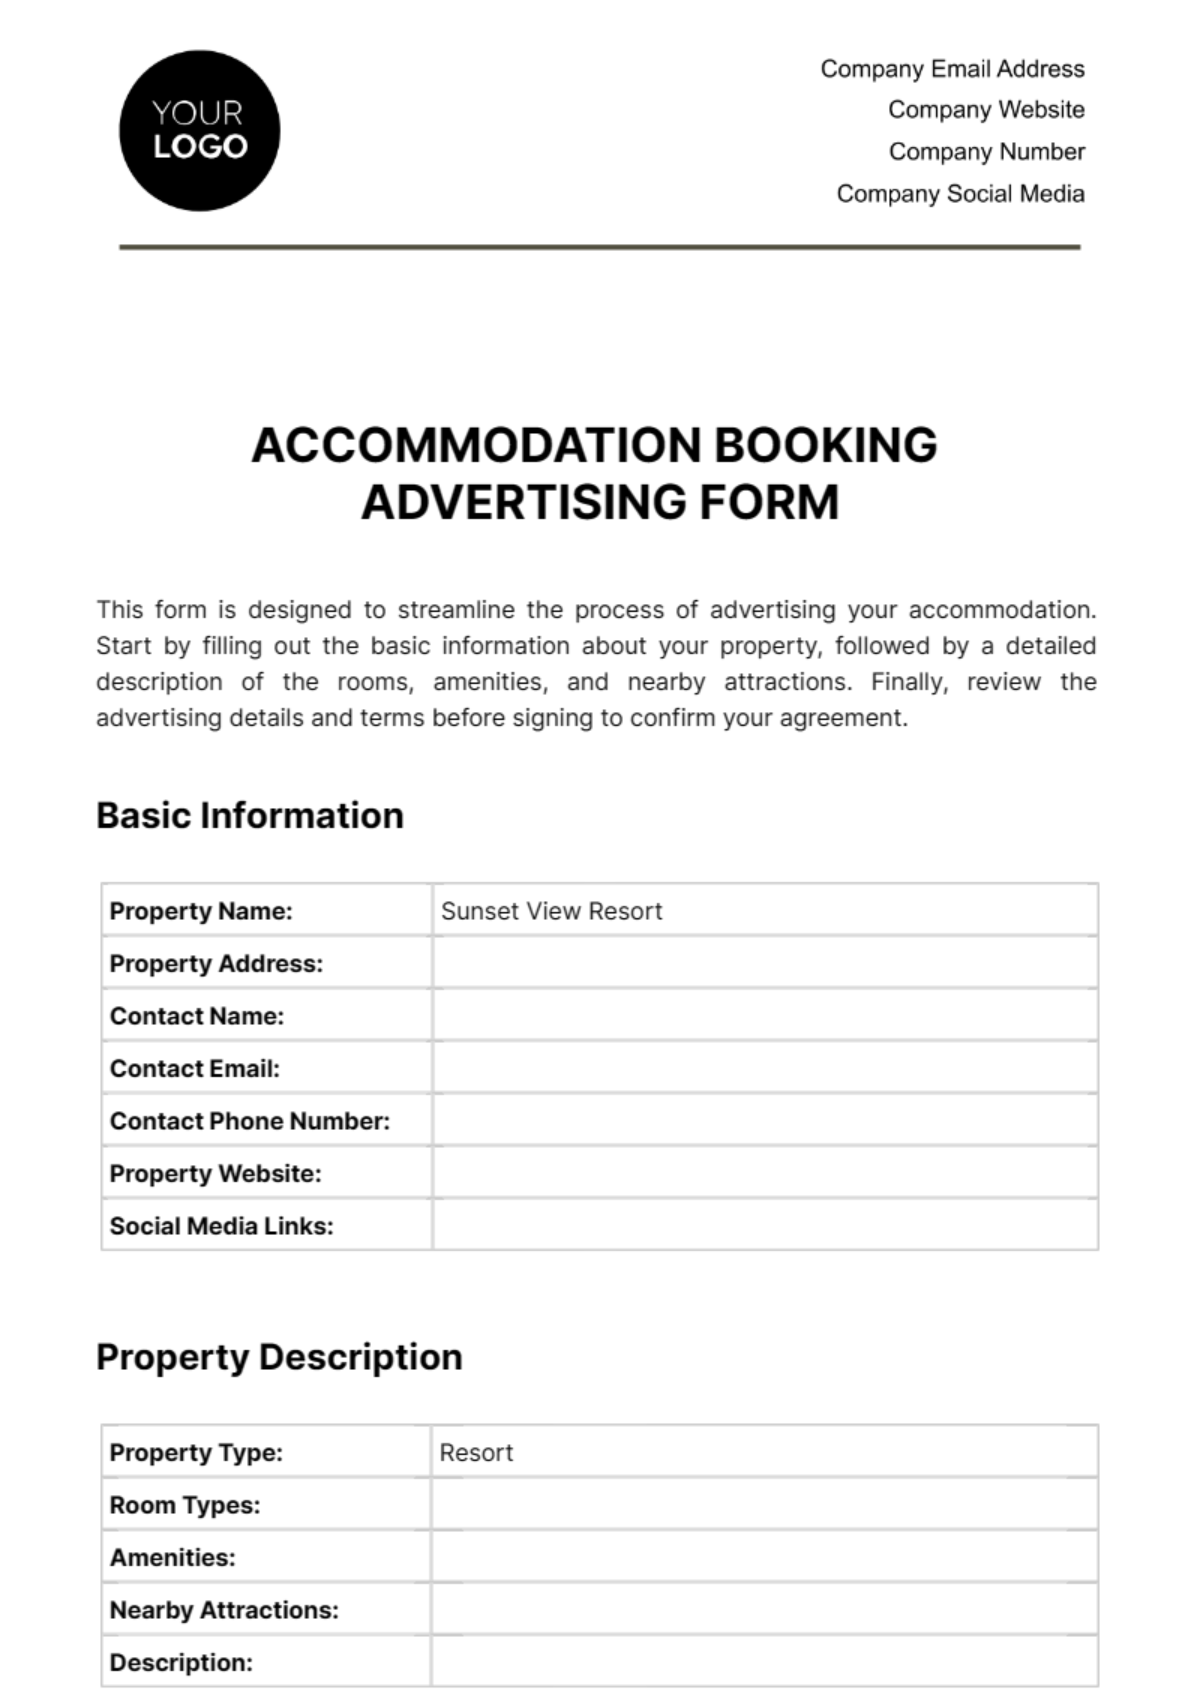 Free Accommodation Booking Advertising Form Template